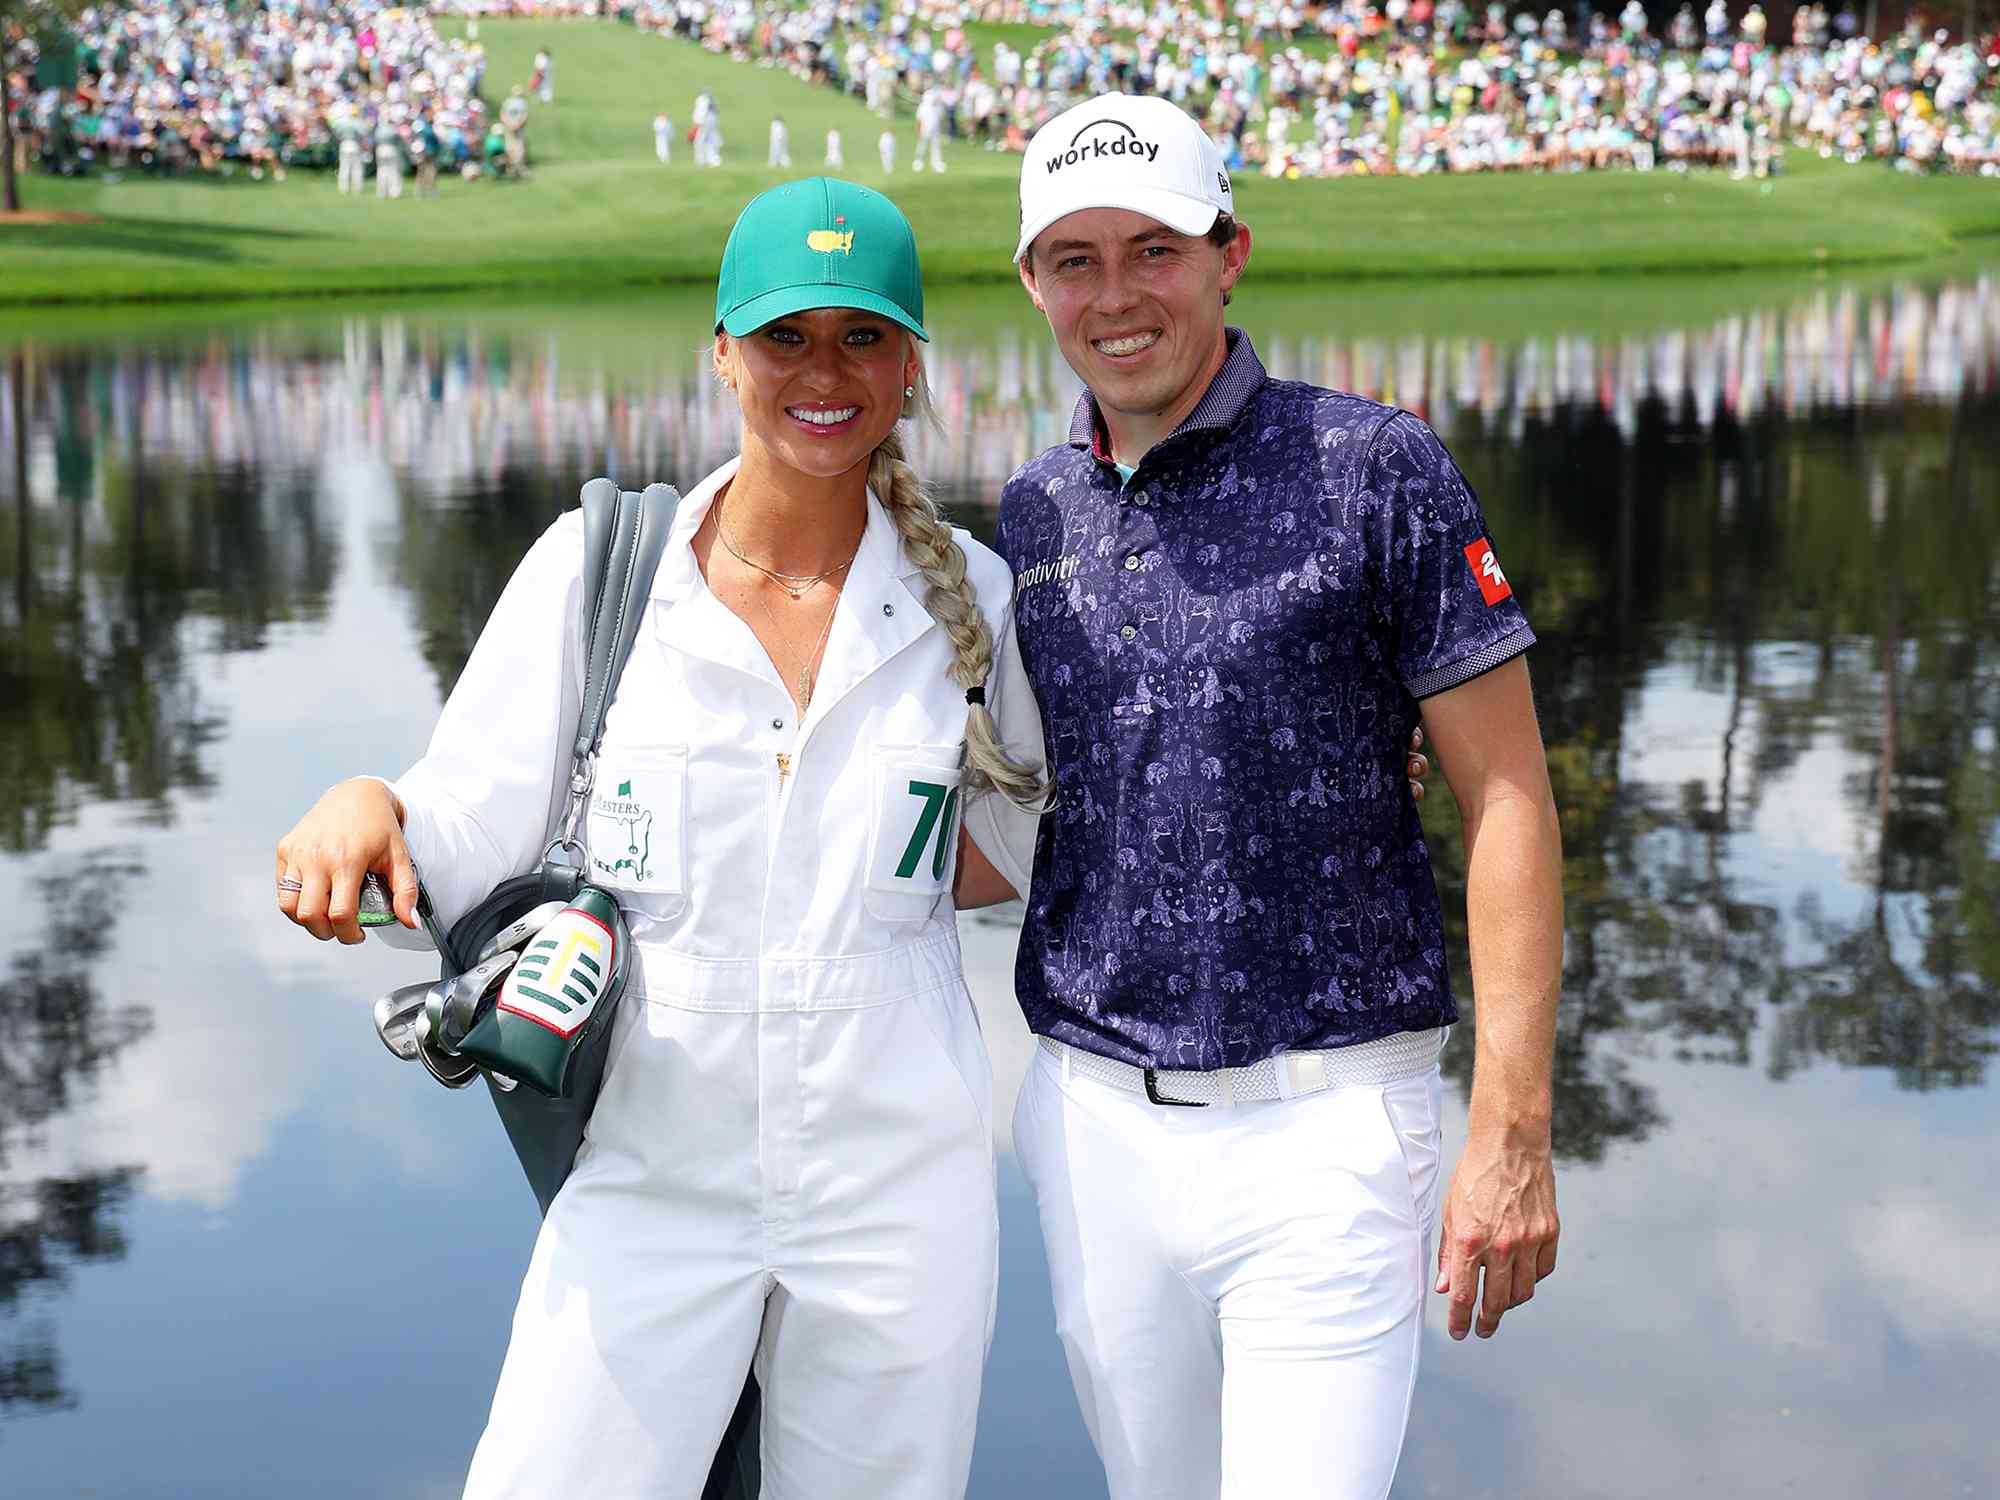 Matt Fitzpatrick of England poses with his girlfriend Katherine Gaal during the Par 3 contest prior to the 2023 Masters Tournament